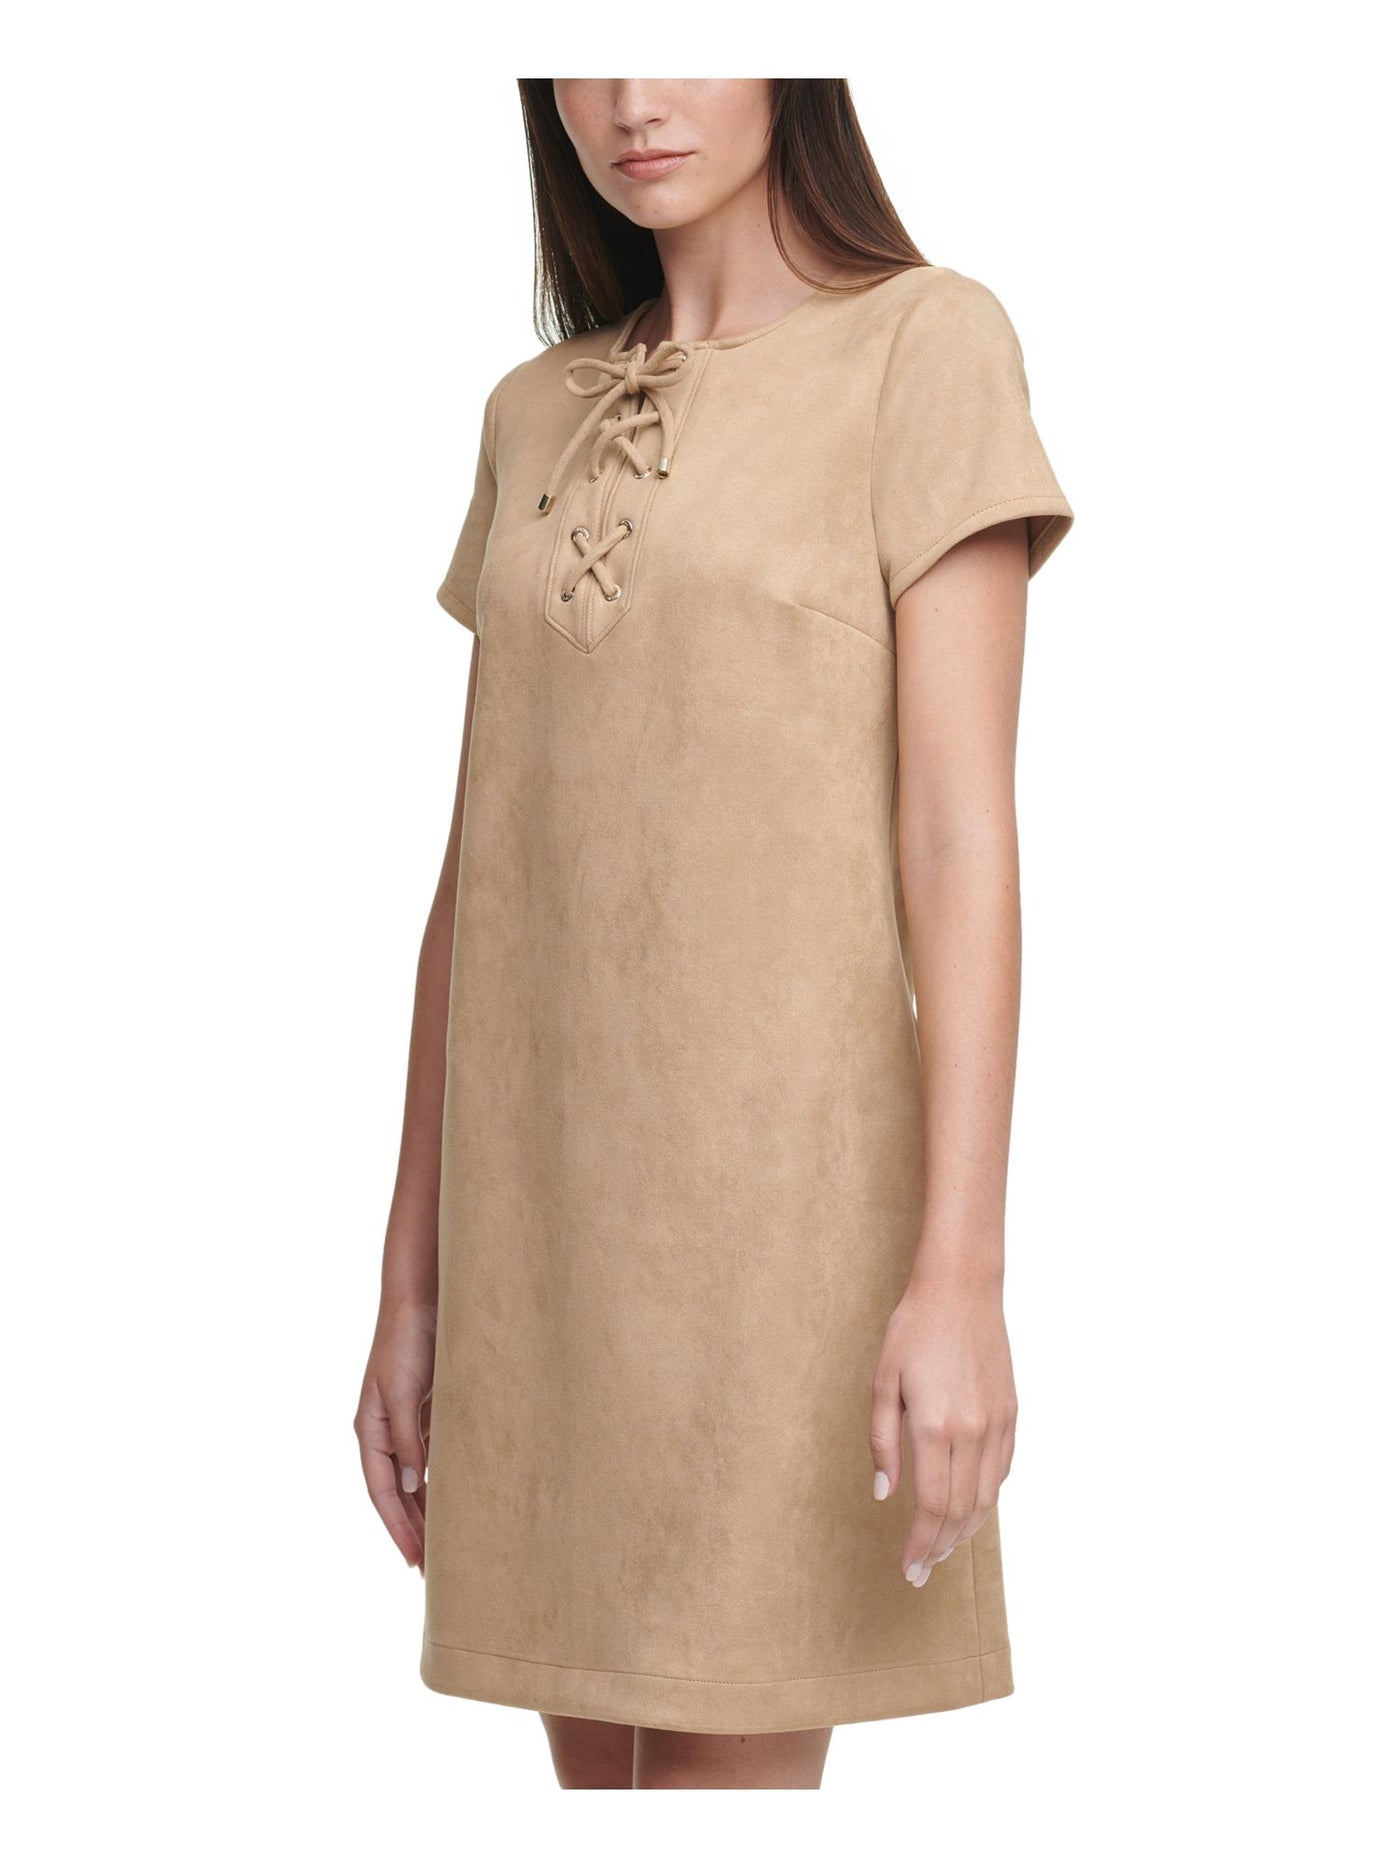 TOMMY HILFIGER Womens Faux Suede Short Sleeve Tie Neck Above The Knee Wear To Work A-Line Dress